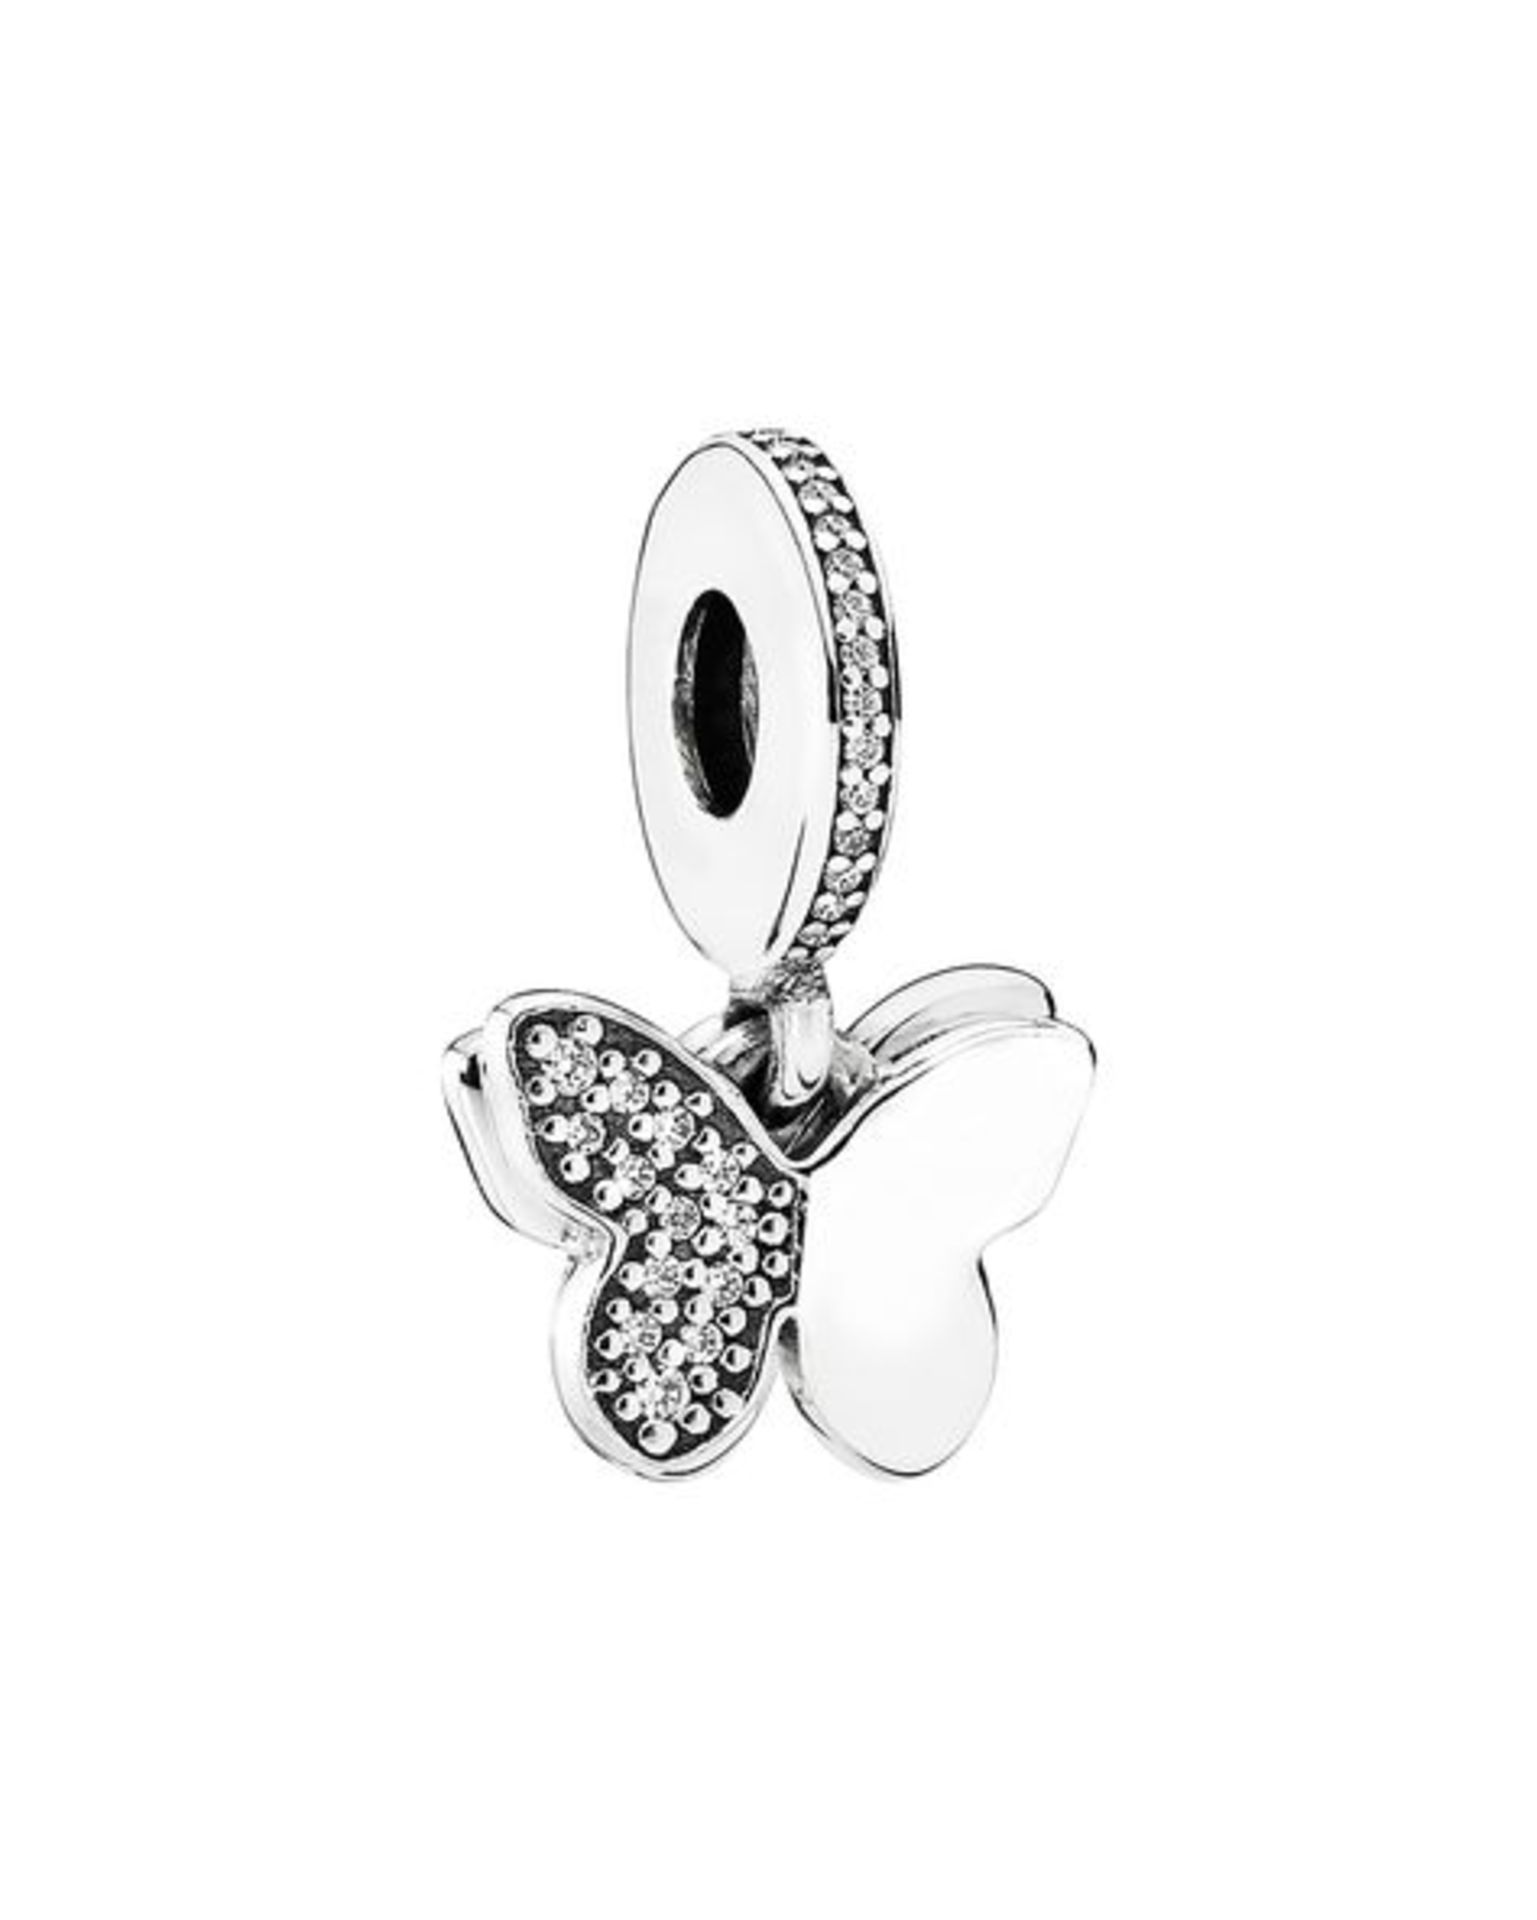 Pandora Butterflies Charm 925 Silver in Presentation pouch & comes with gift bag (ideal Valentines